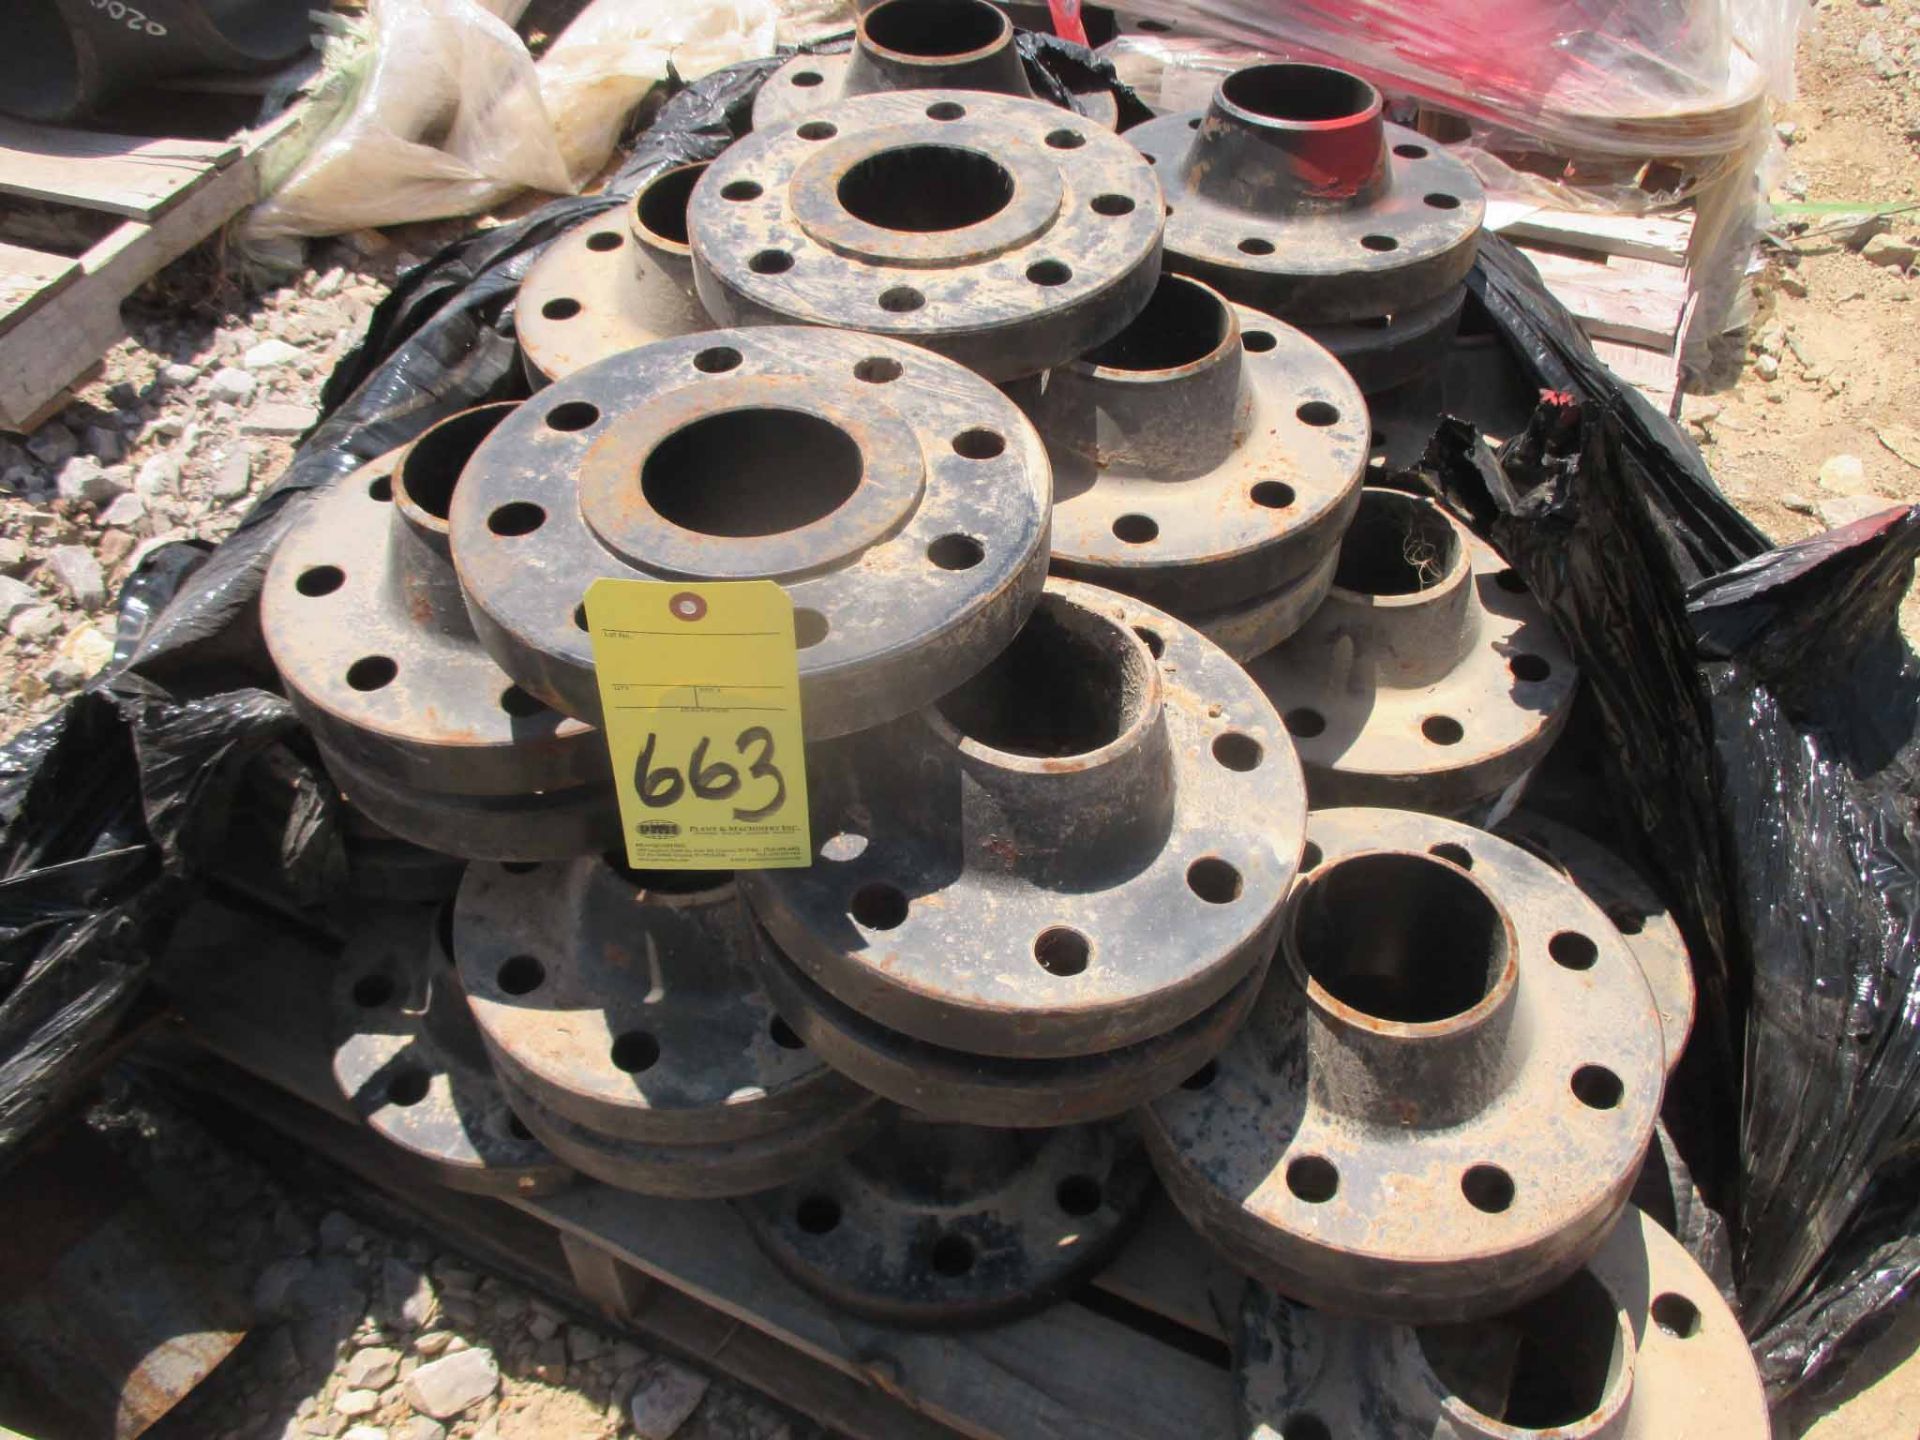 LOT CONSISTING OF: APPROX. (140) FLANGE WELD NECK,RF,4"-600#,S40/STD,SA-105-N,ASME B16.5; APPROX. (